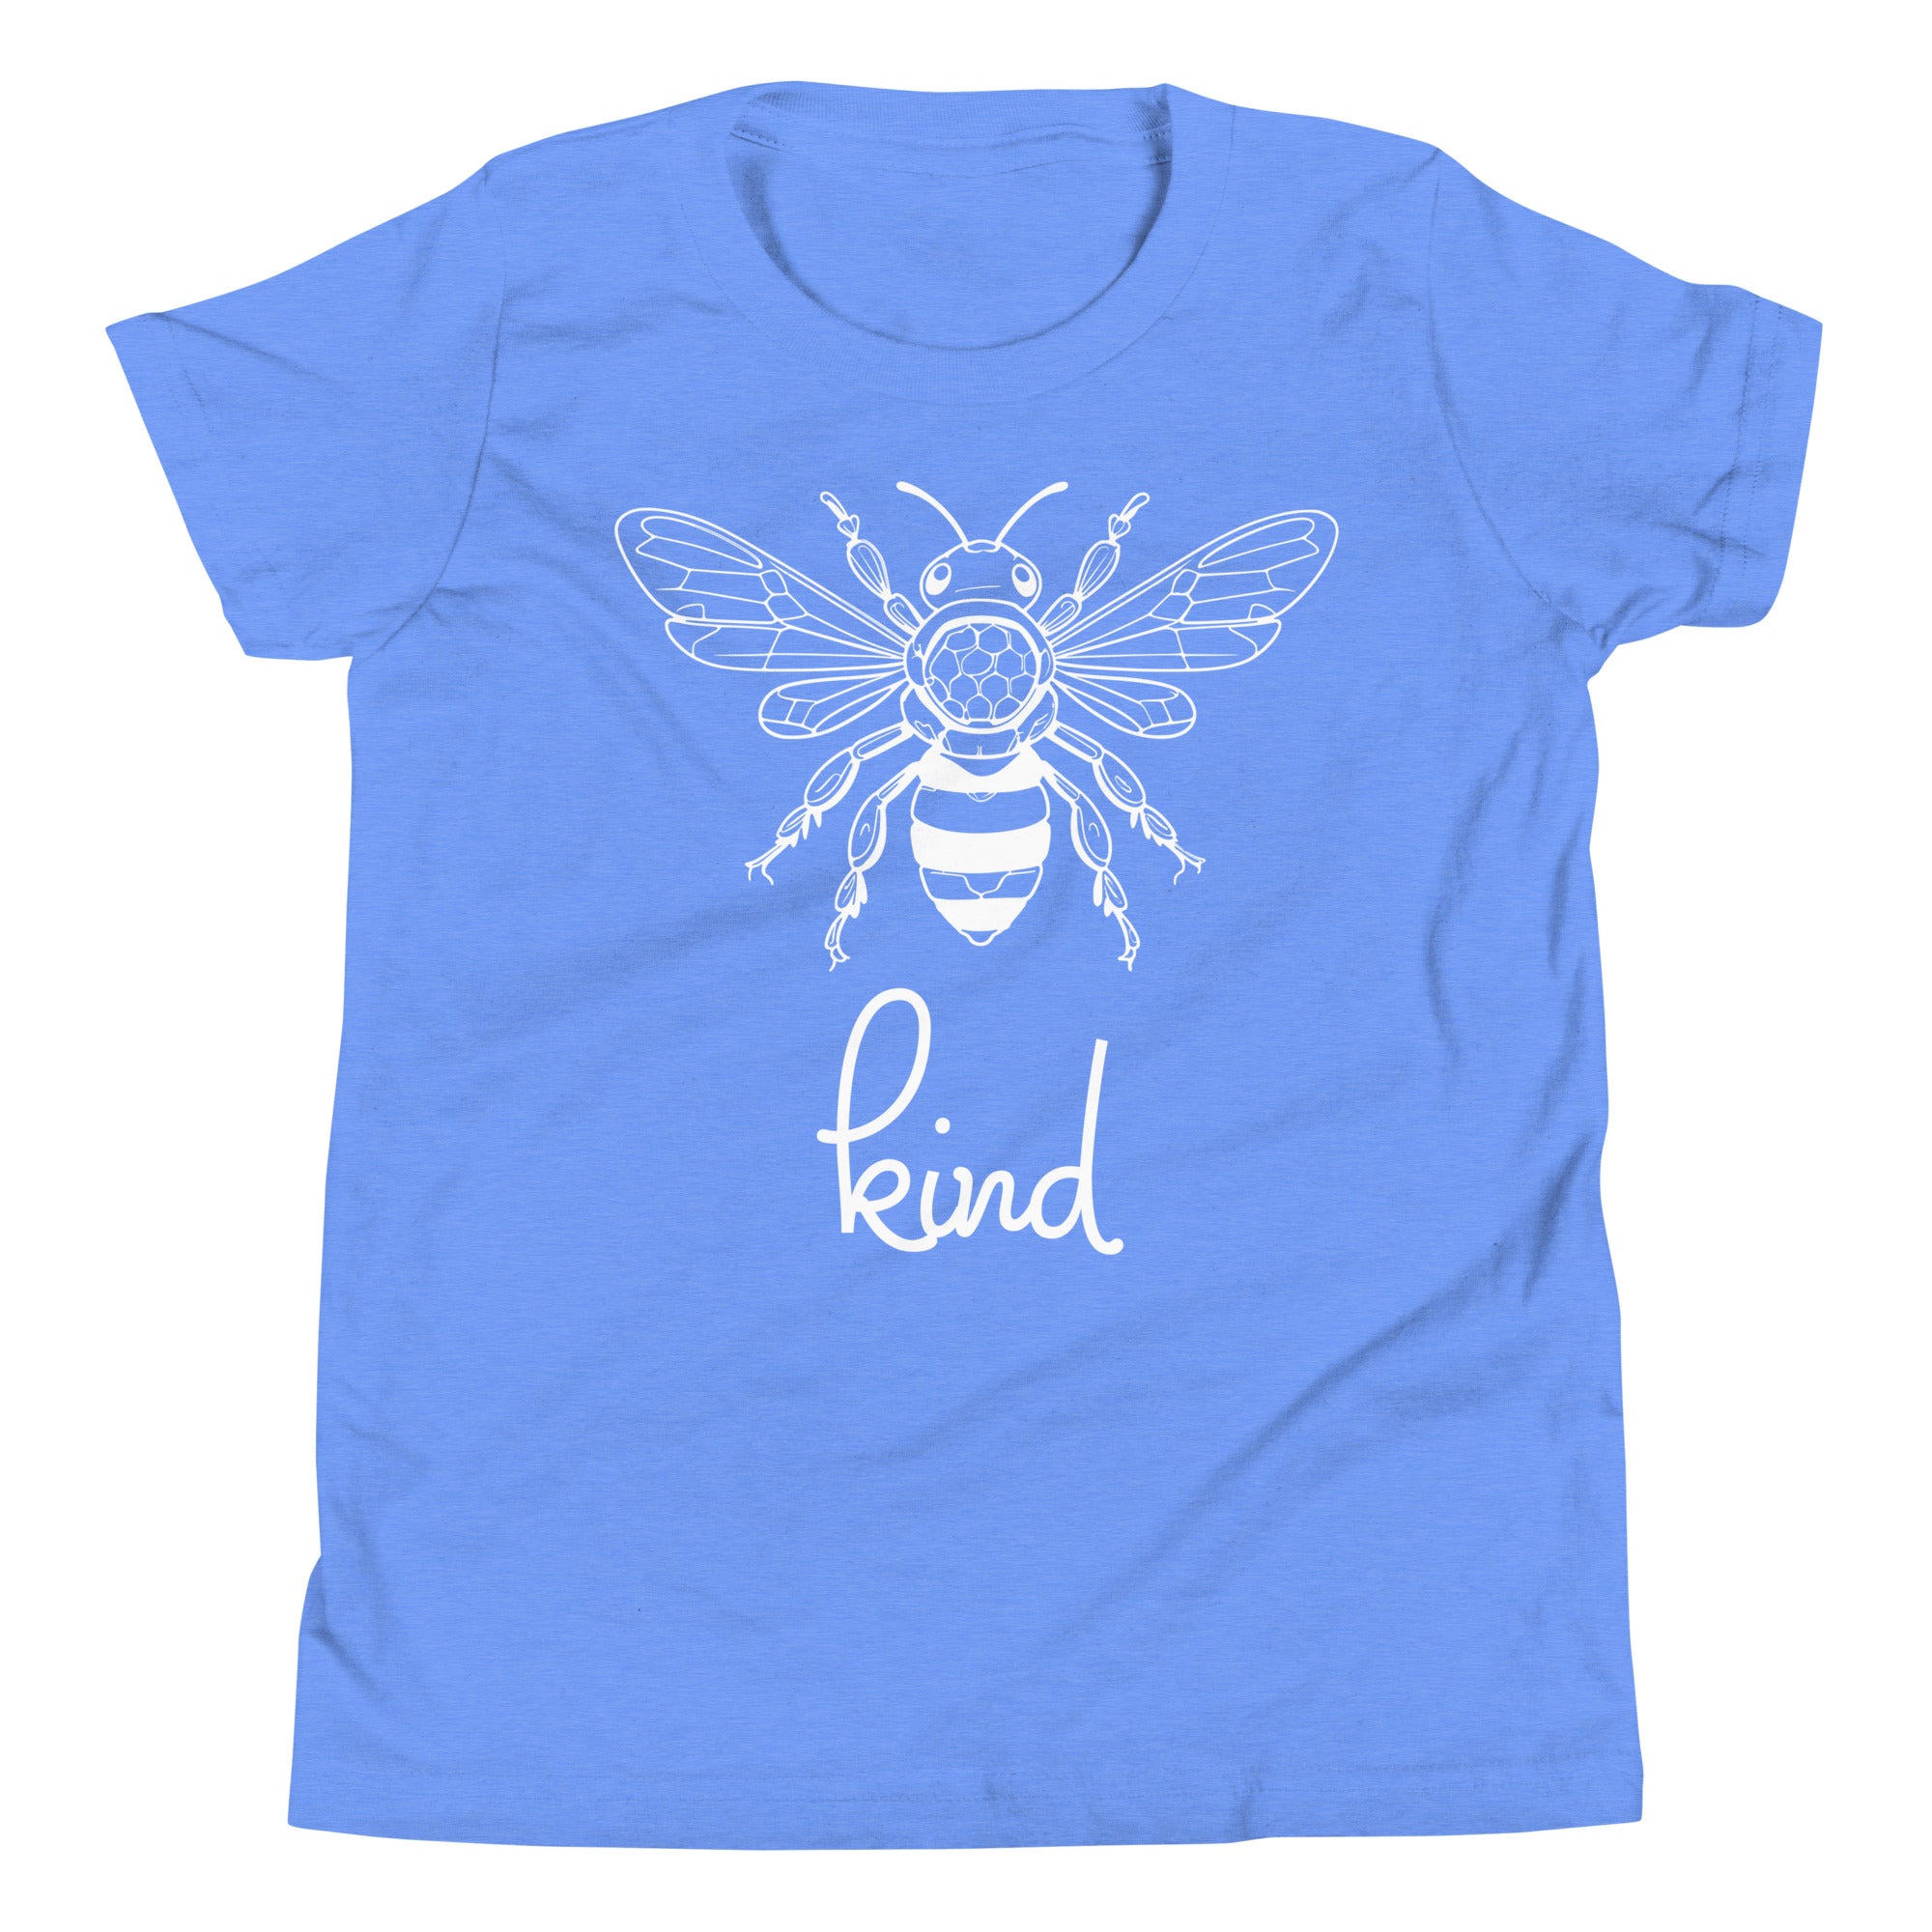 Bee Kind Youth T-Shirt, Gift For Bee Lovers Heather Columbia Blue YM YL YS YXL DenBox